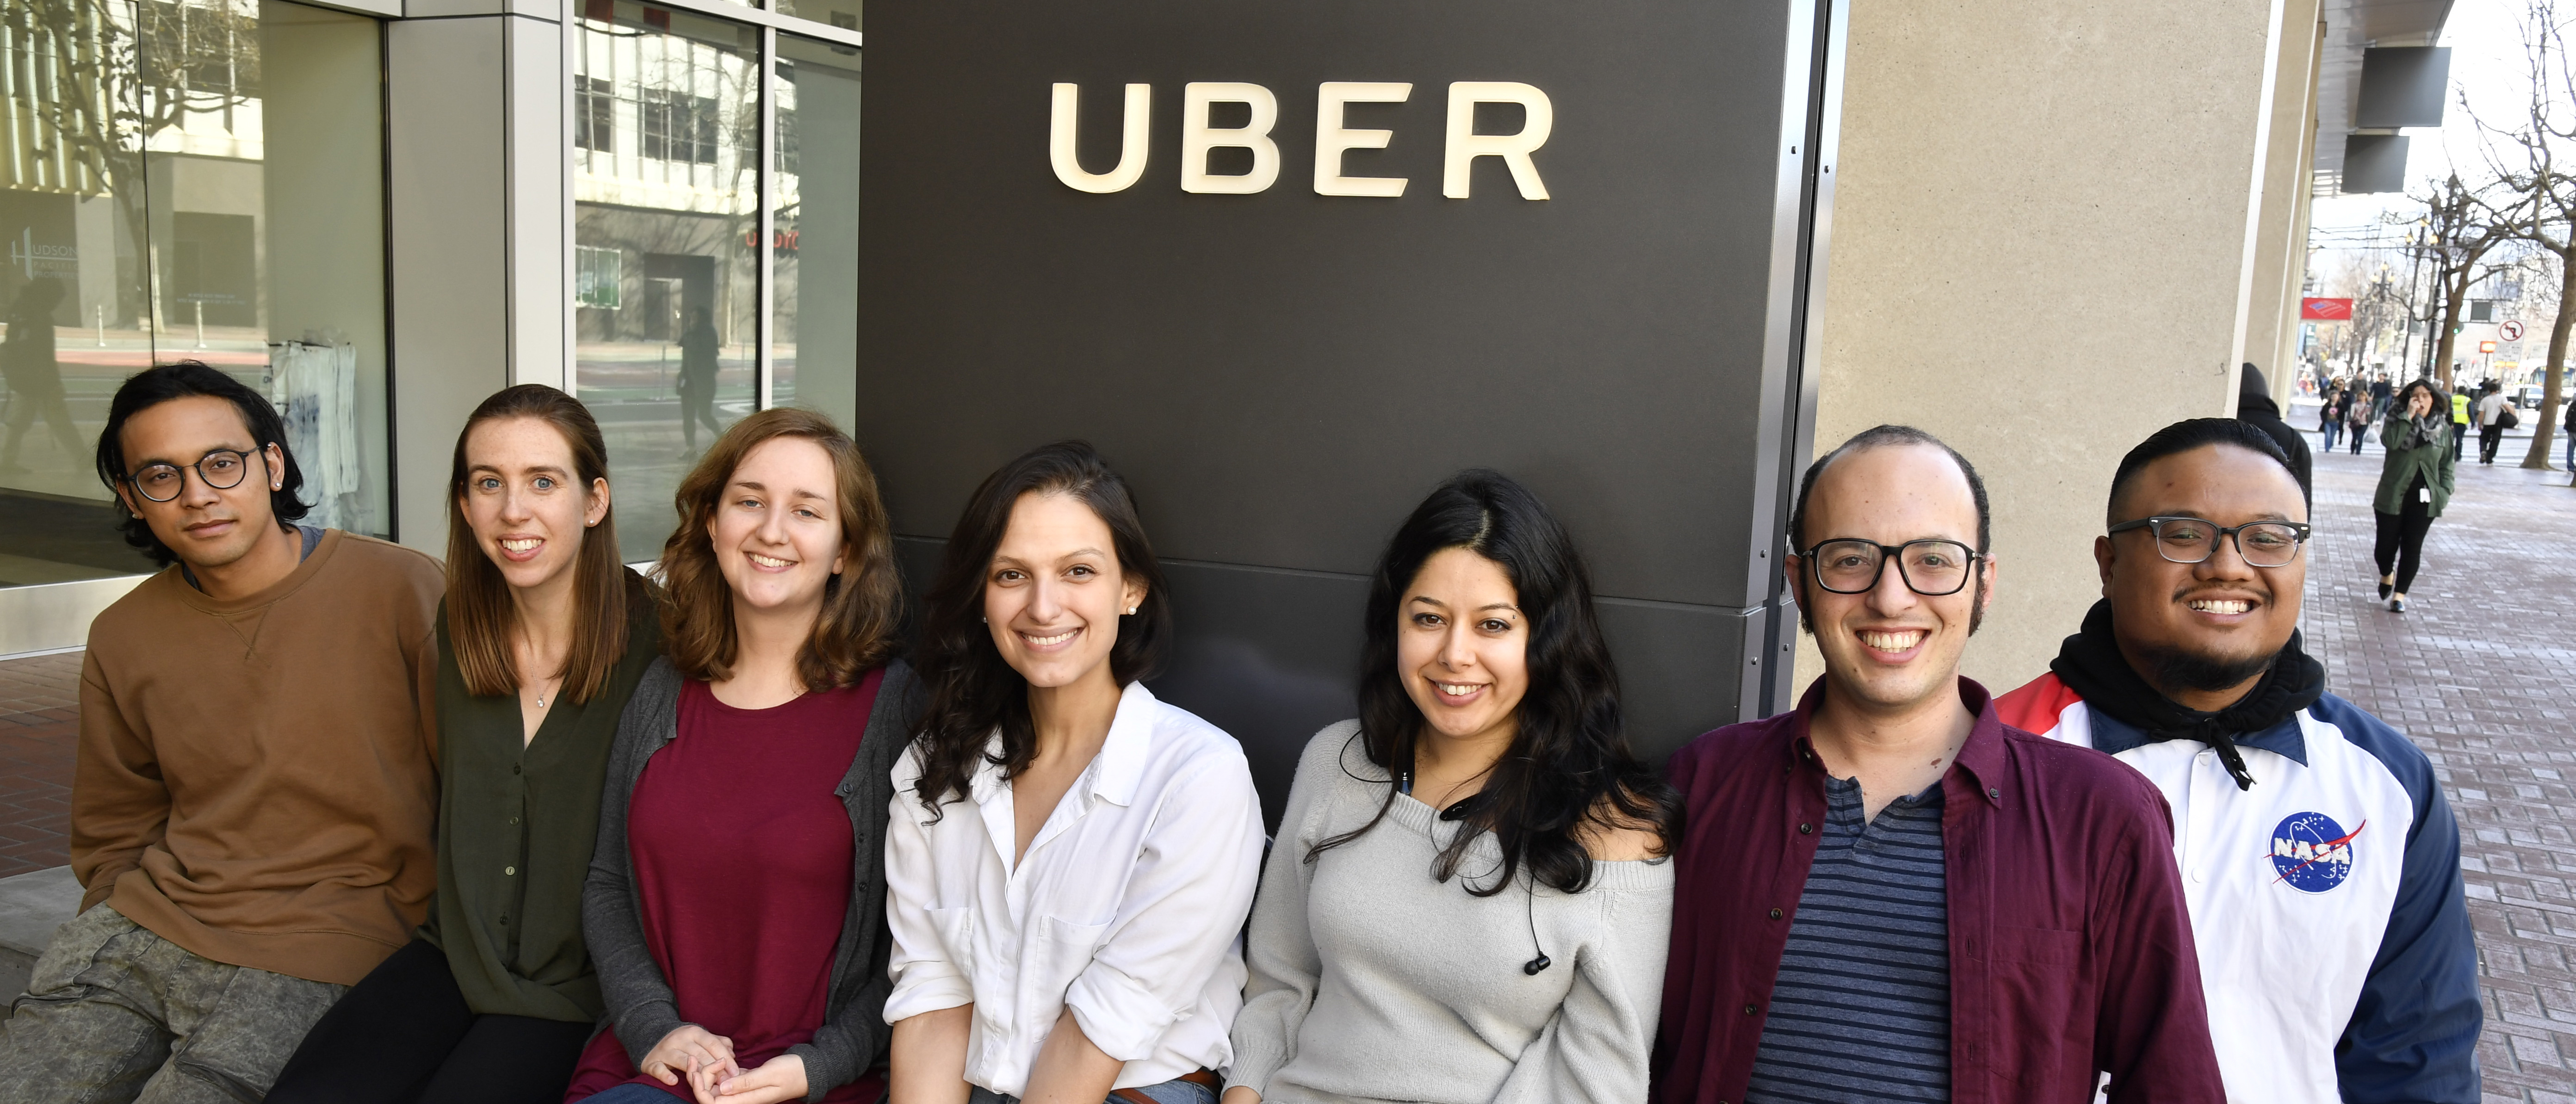 Uber's Software Engineer Apprentice Program gives developers with non-traditional paths to programming an opportunity to work on industry-level software while receiving extended training and mentorship.